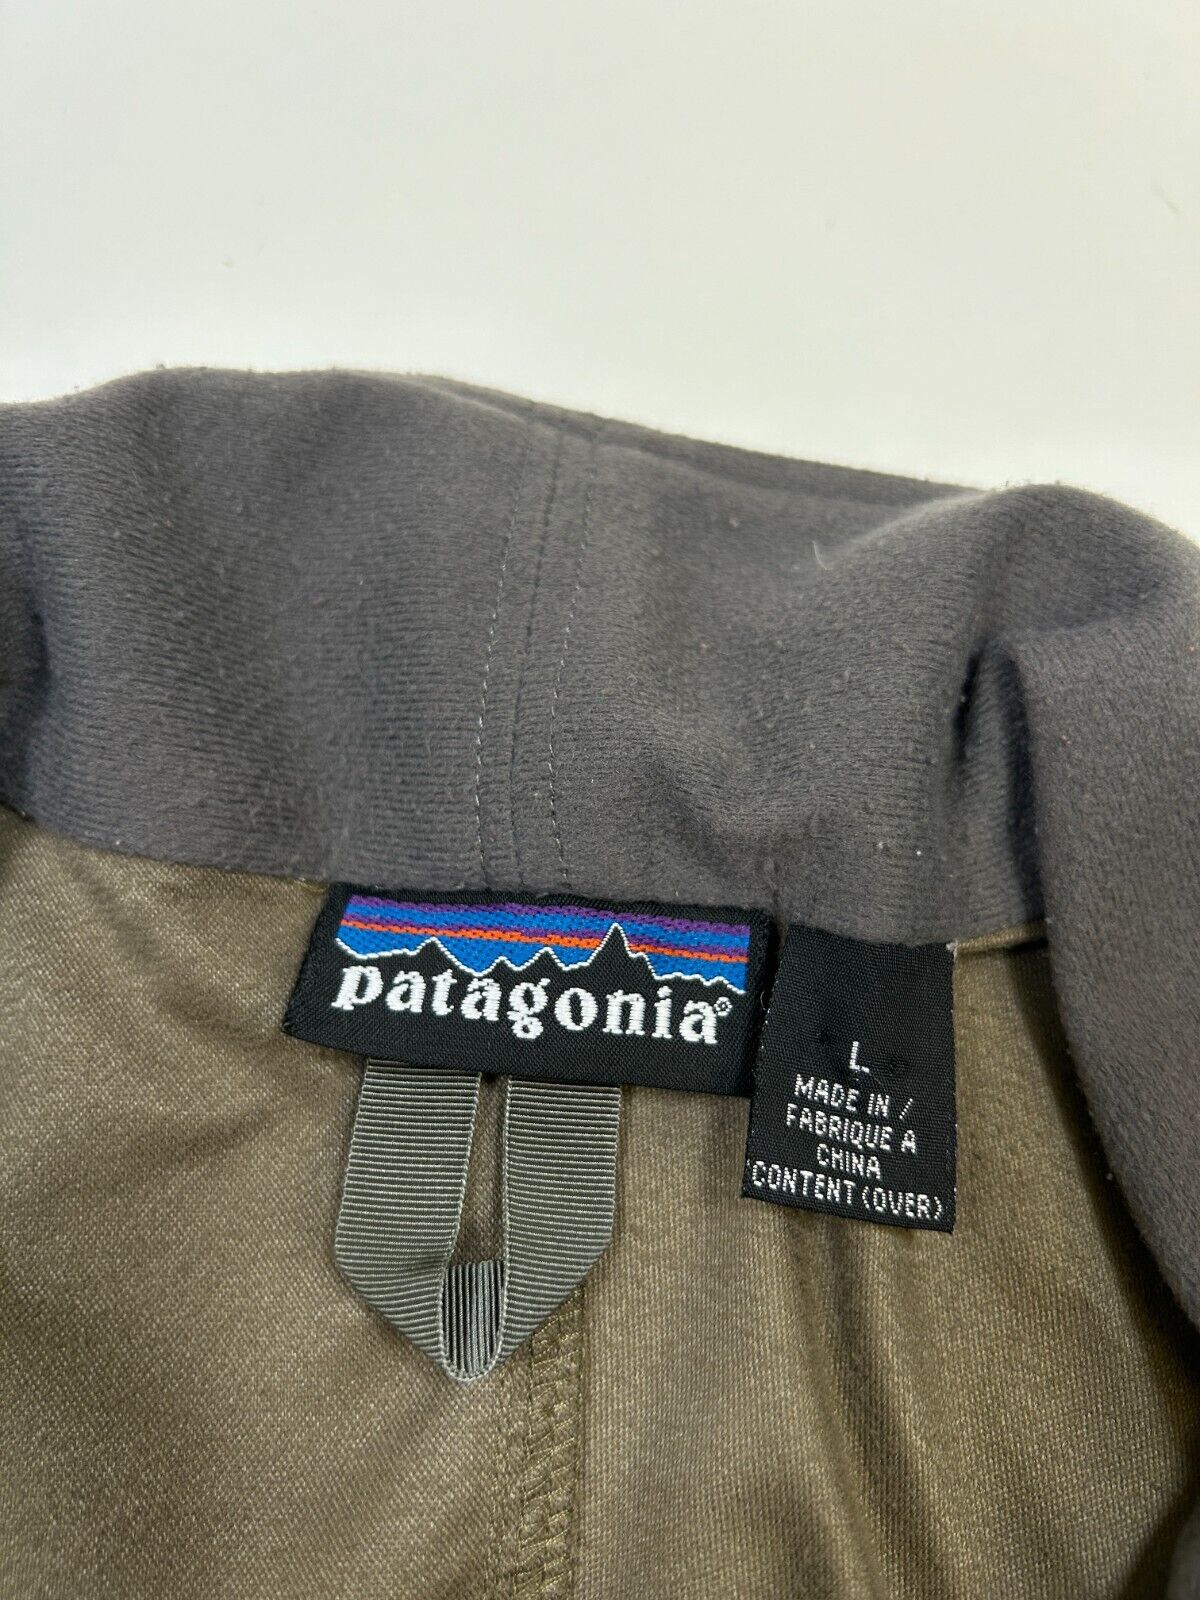 Vintage Patagonia Earth Tone Light Weight Full Zip Shell Jacket Size Large